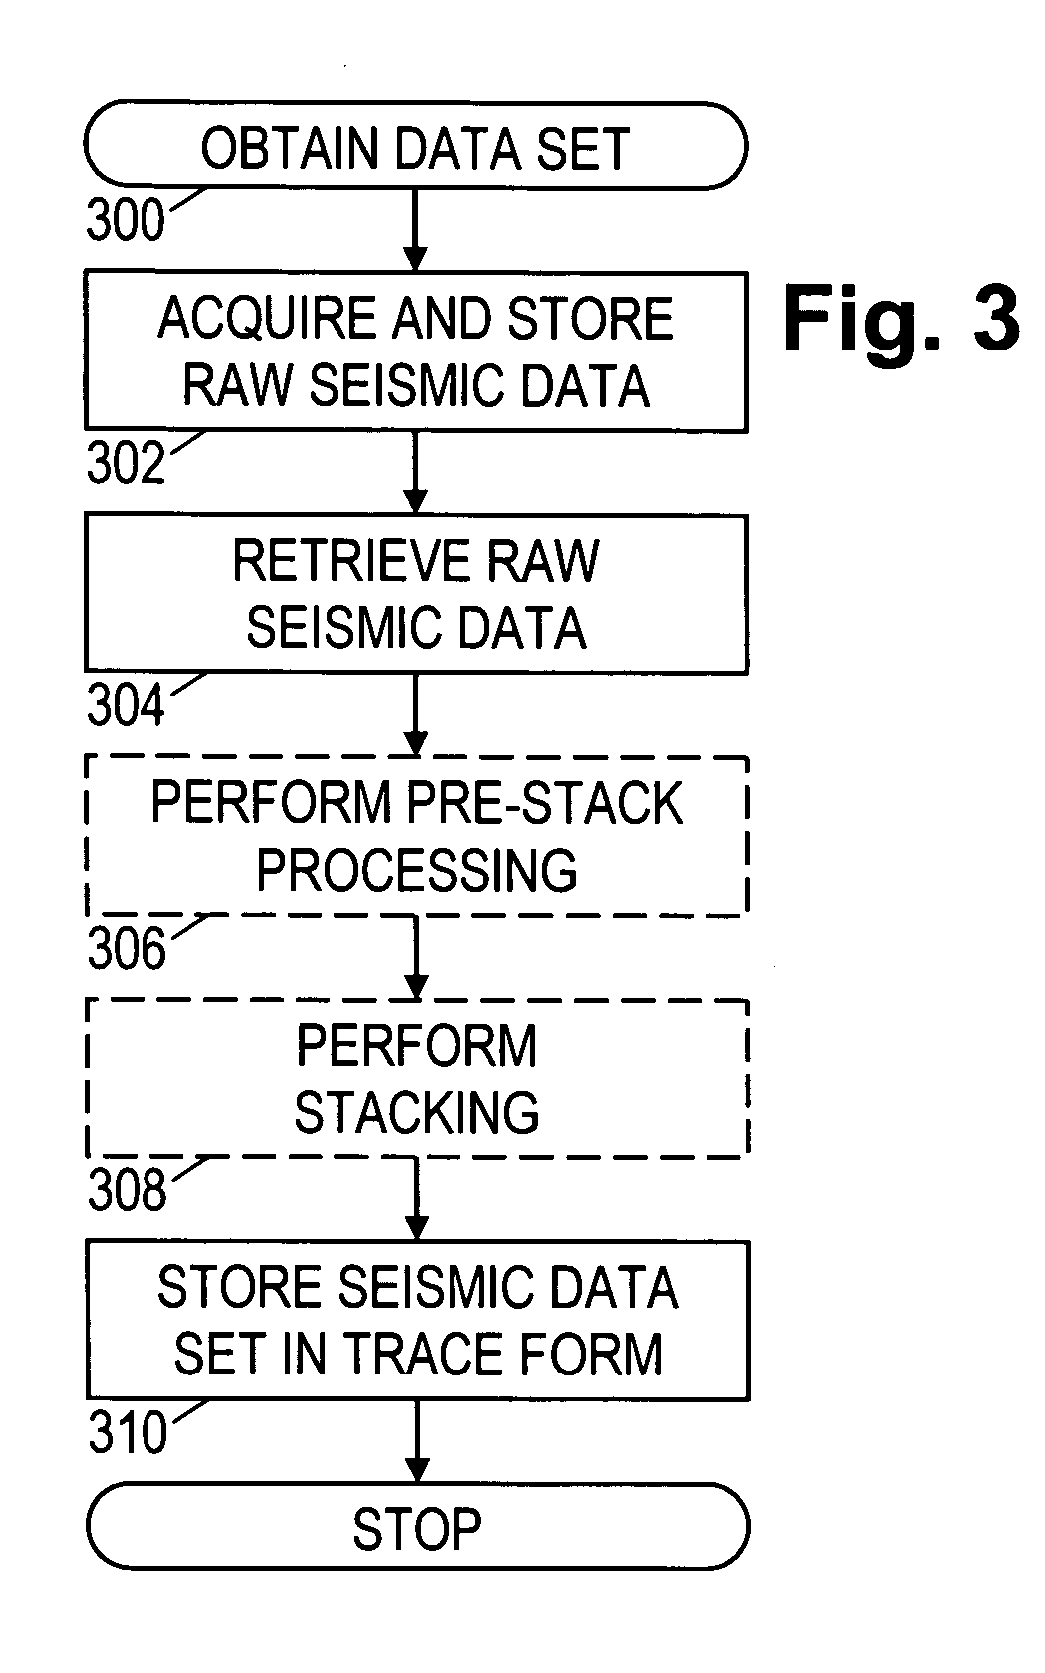 Systems and methods of hydrocarbon detection using wavelet energy absorption analysis